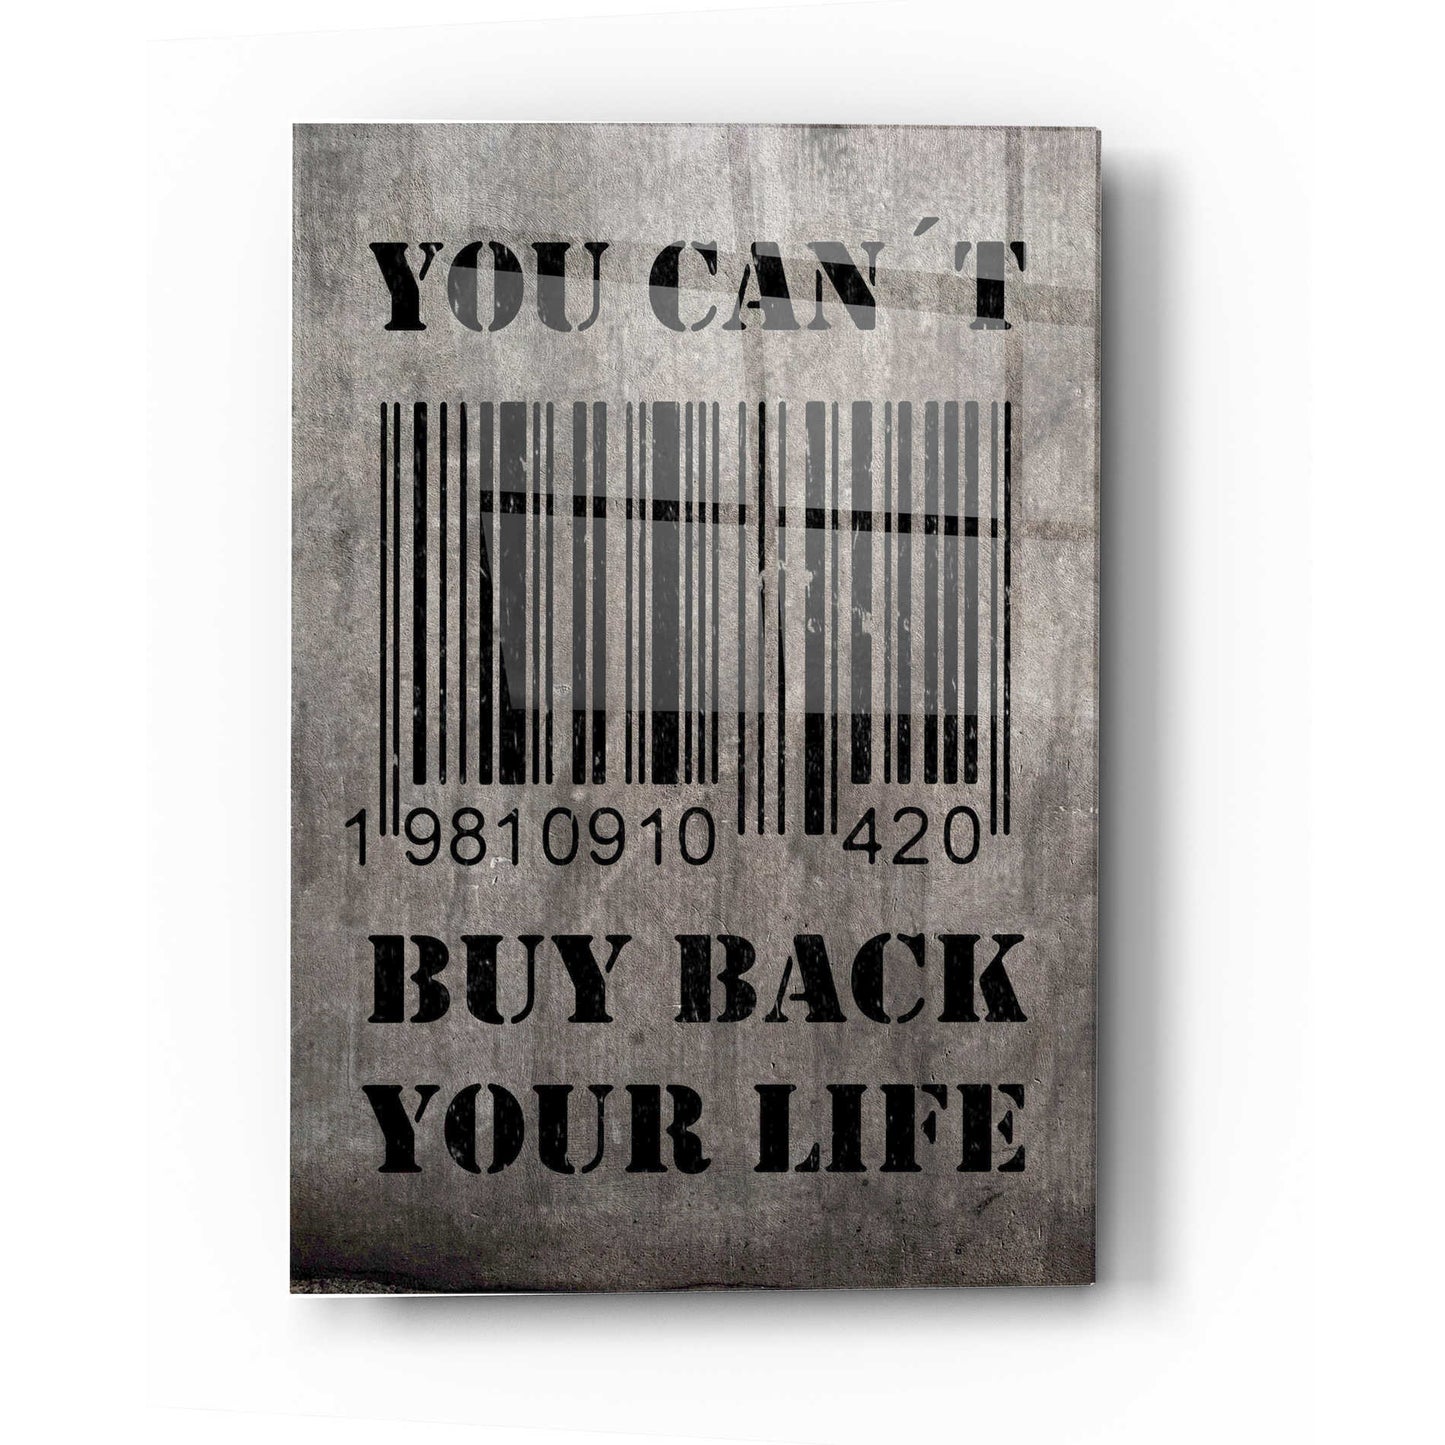 Epic Art 'You Can't Buy Back Your Life' by Nicklas Gustafsson, Acrylic Glass Wall Art,16x24